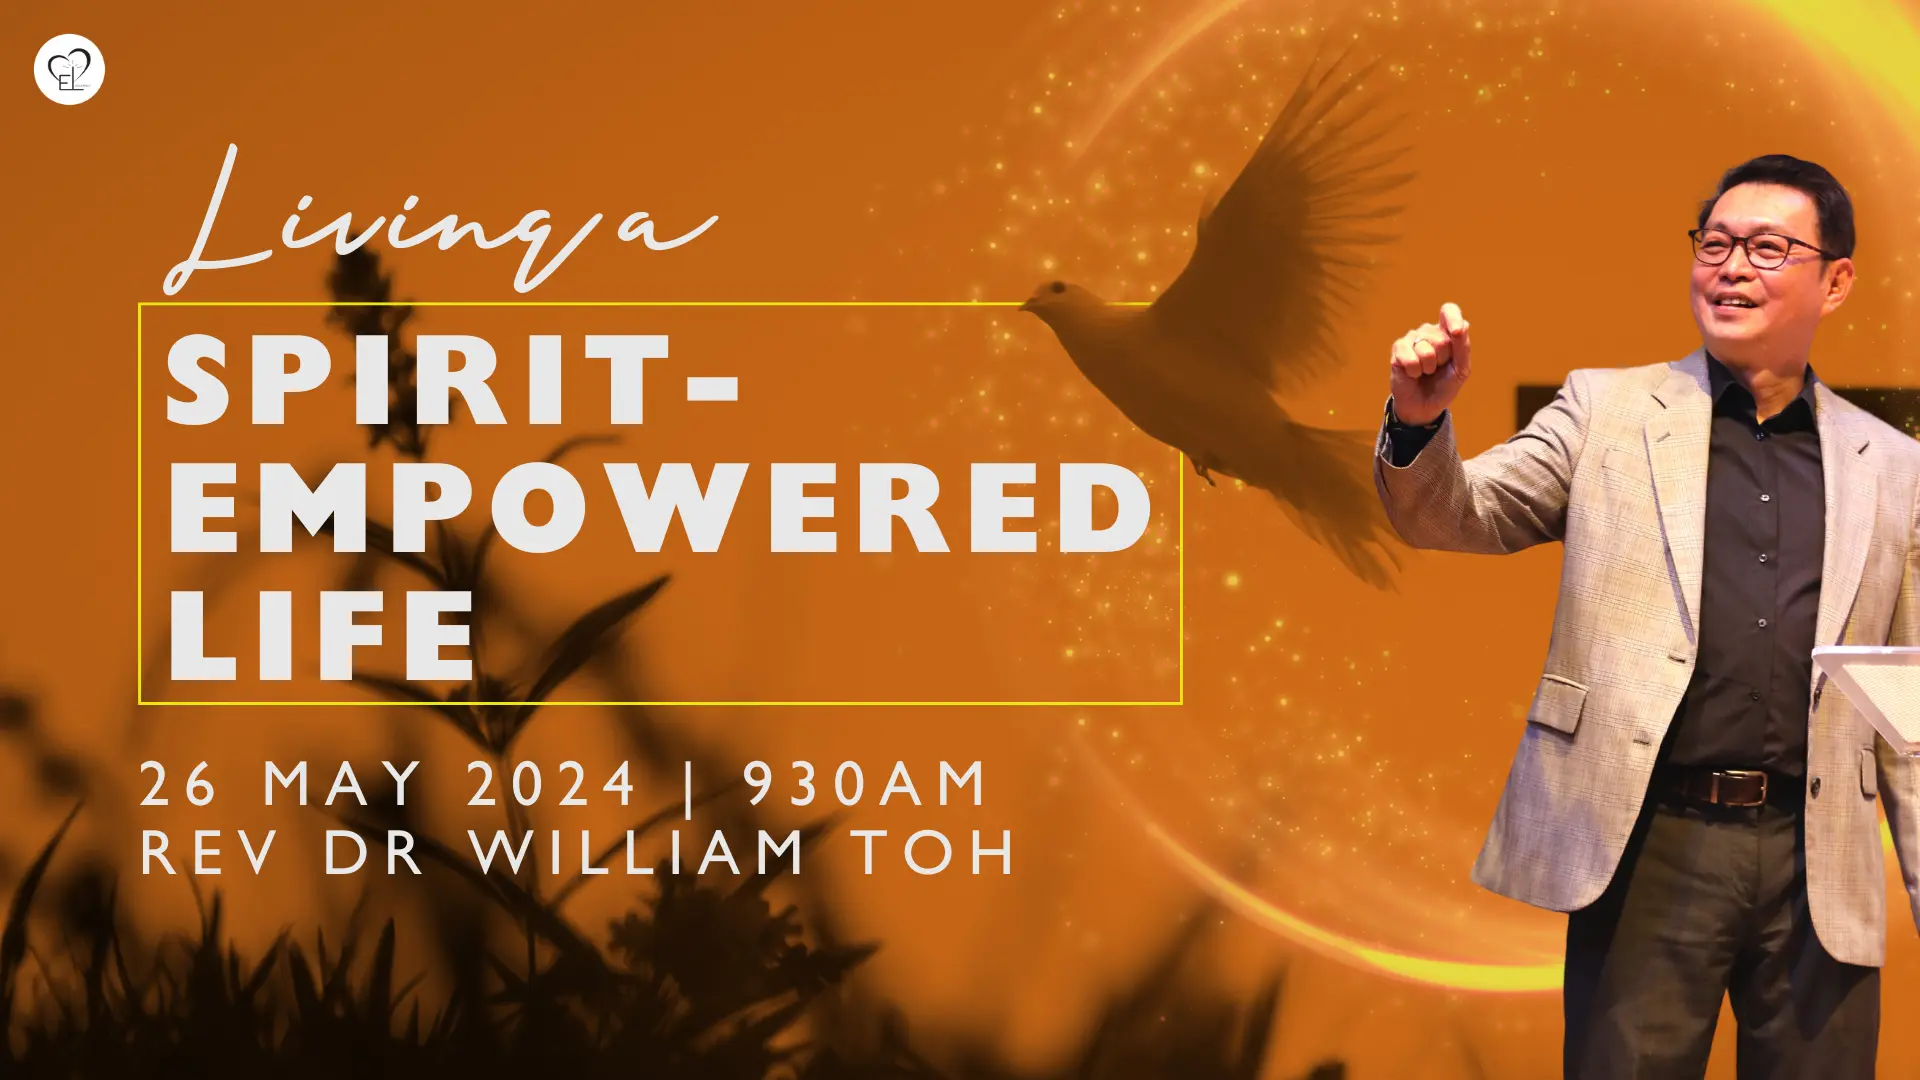 After Pentecost by Dr. William Toh